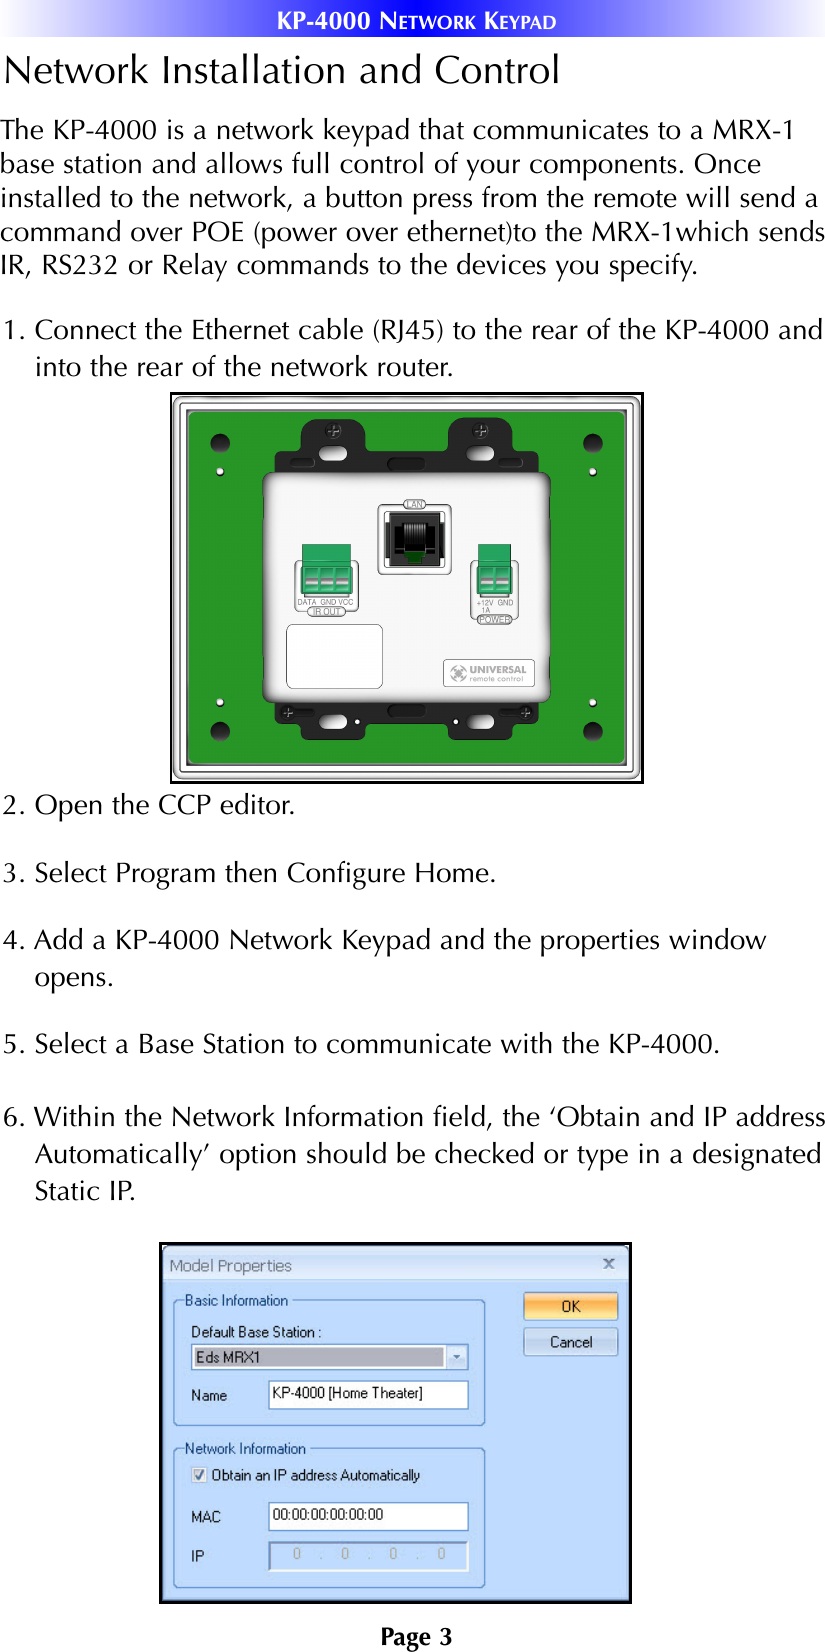 Page 3Network Installation and Control1. Connect the Ethernet cable (RJ45) to the rear of the KP-4000 andinto the rear of the network router.2. Open the CCP editor.3. Select Program then Configure Home.4. Add a KP-4000 Network Keypad and the properties windowopens. 5. Select a Base Station to communicate with the KP-4000.6. Within the Network Information field, the ‘Obtain and IP addressAutomatically’ option should be checked or type in a designatedStatic IP. KP-4000 NETWORK KEYPADThe KP-4000 is a network keypad that communicates to a MRX-1base station and allows full control of your components. Onceinstalled to the network, a button press from the remote will send acommand over POE (power over ethernet)to the MRX-1which sendsIR, RS232 or Relay commands to the devices you specify.  